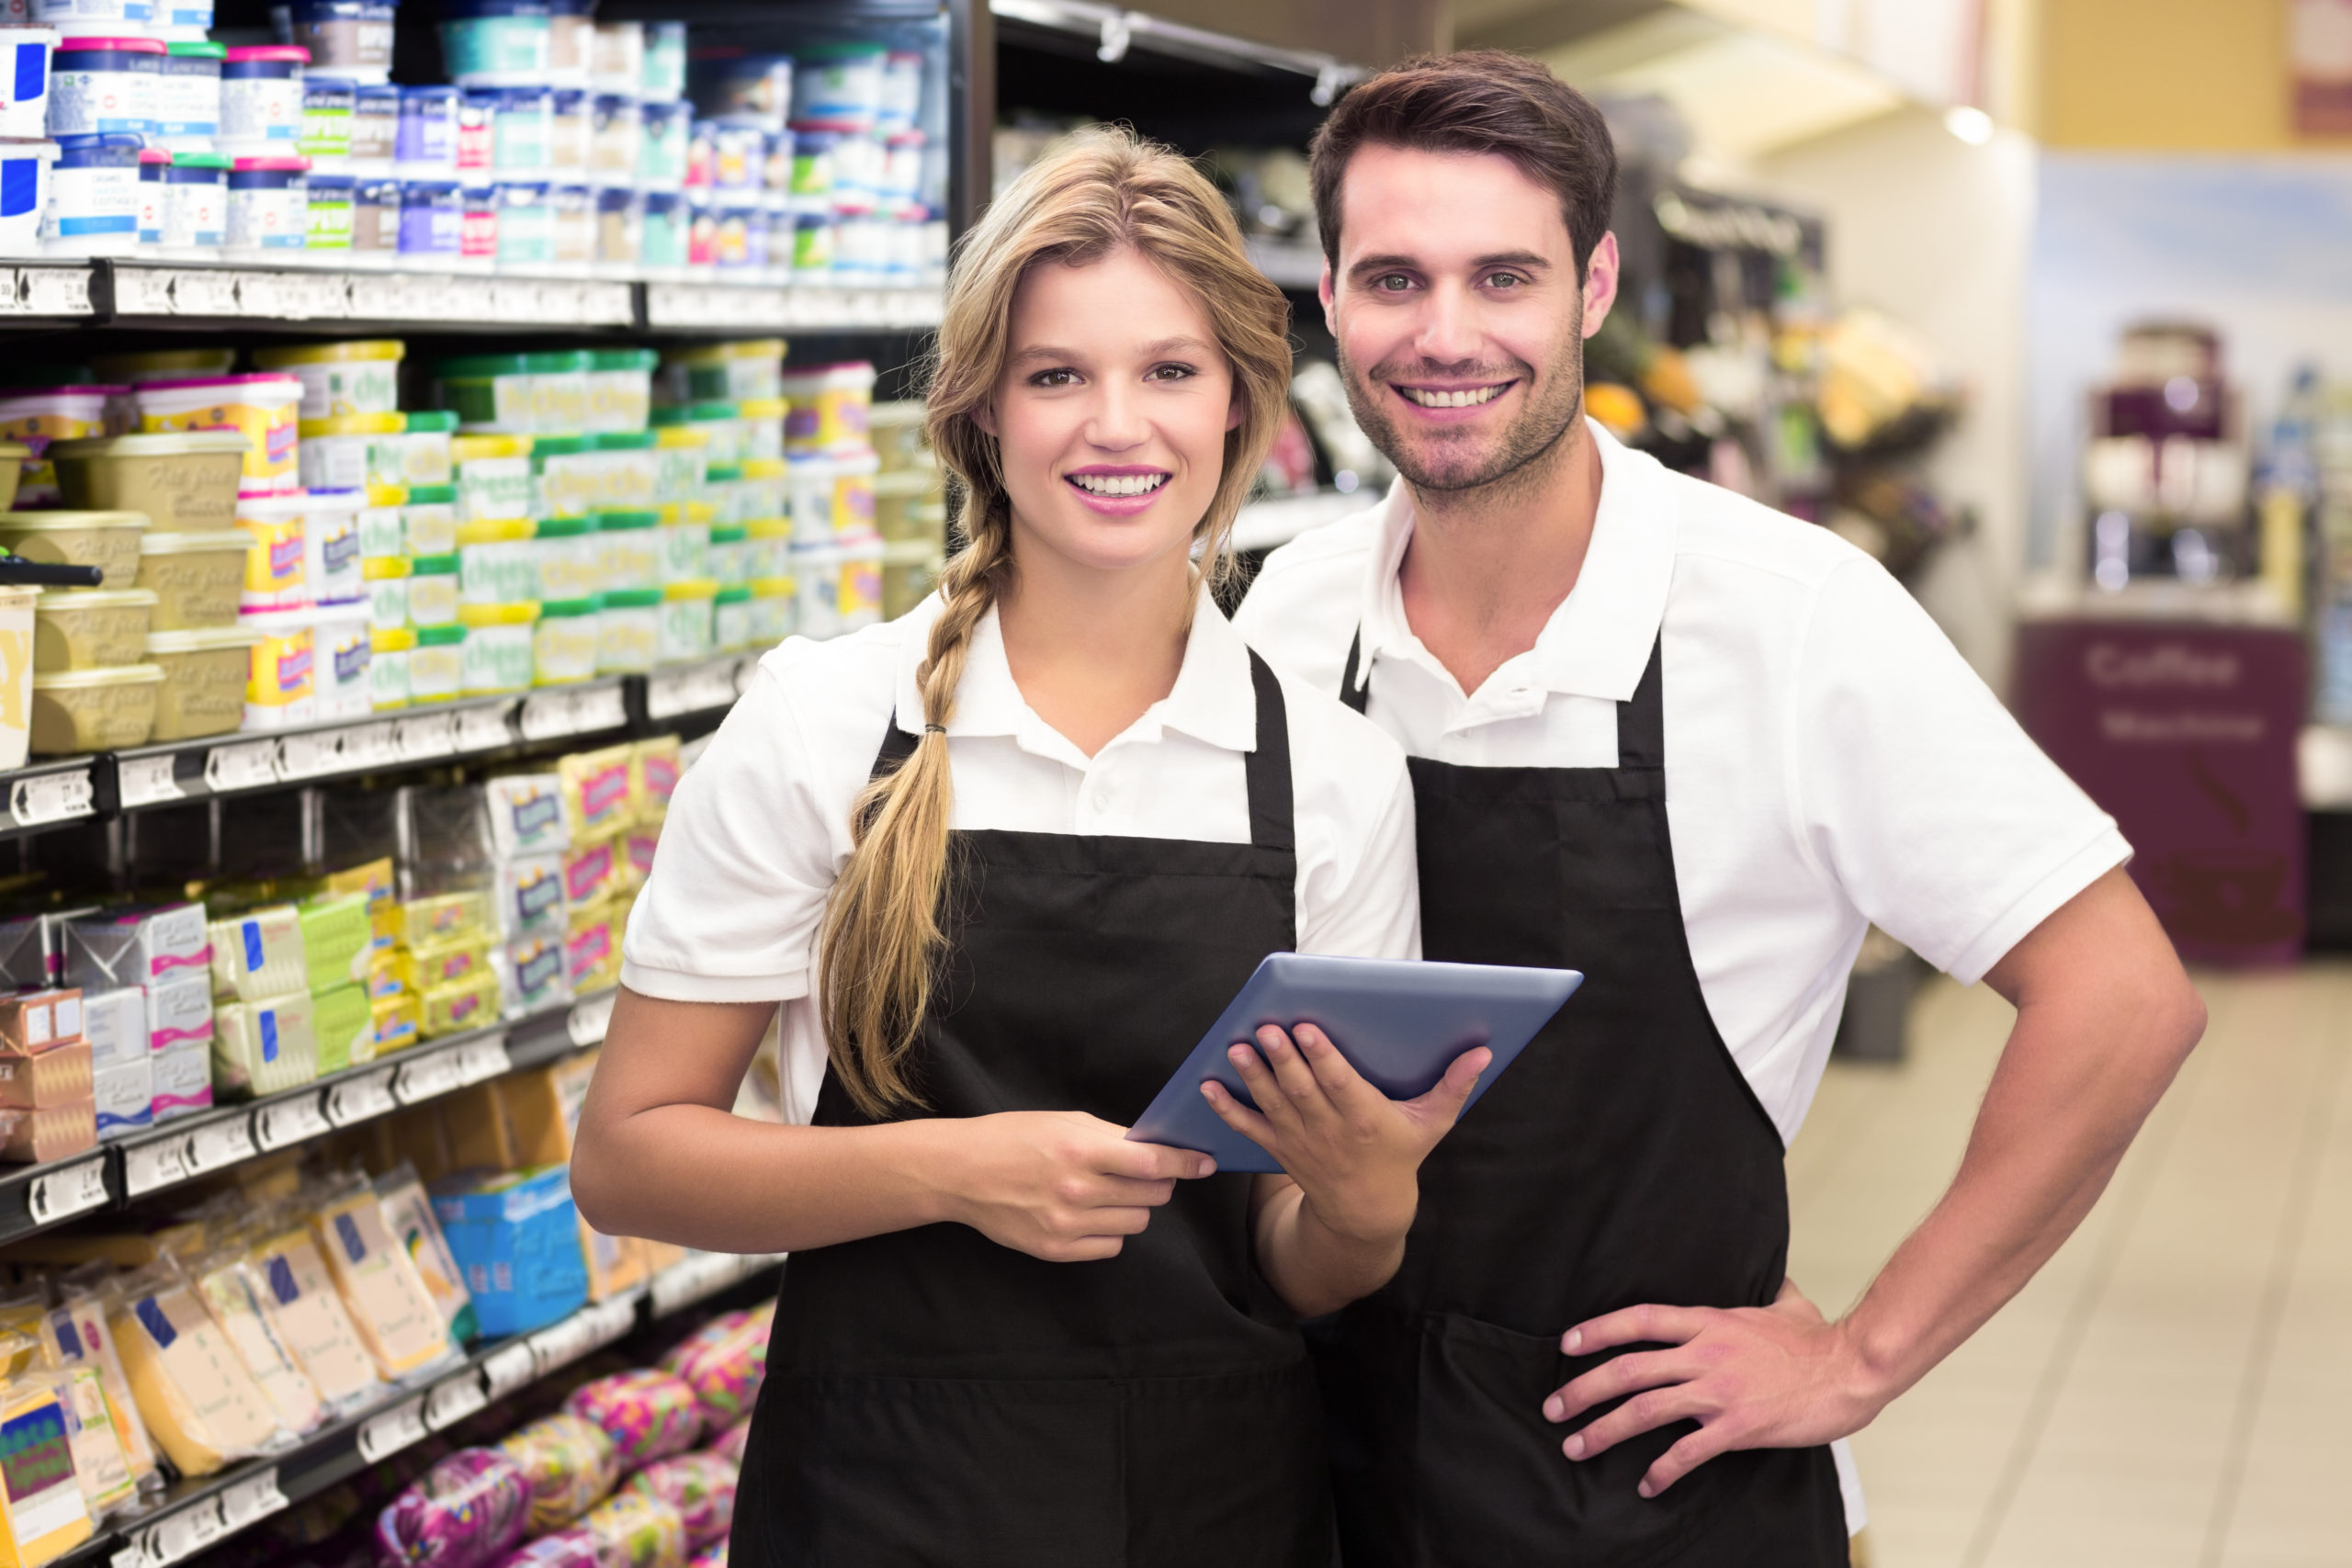 Independent Grocers Need to Go Digital